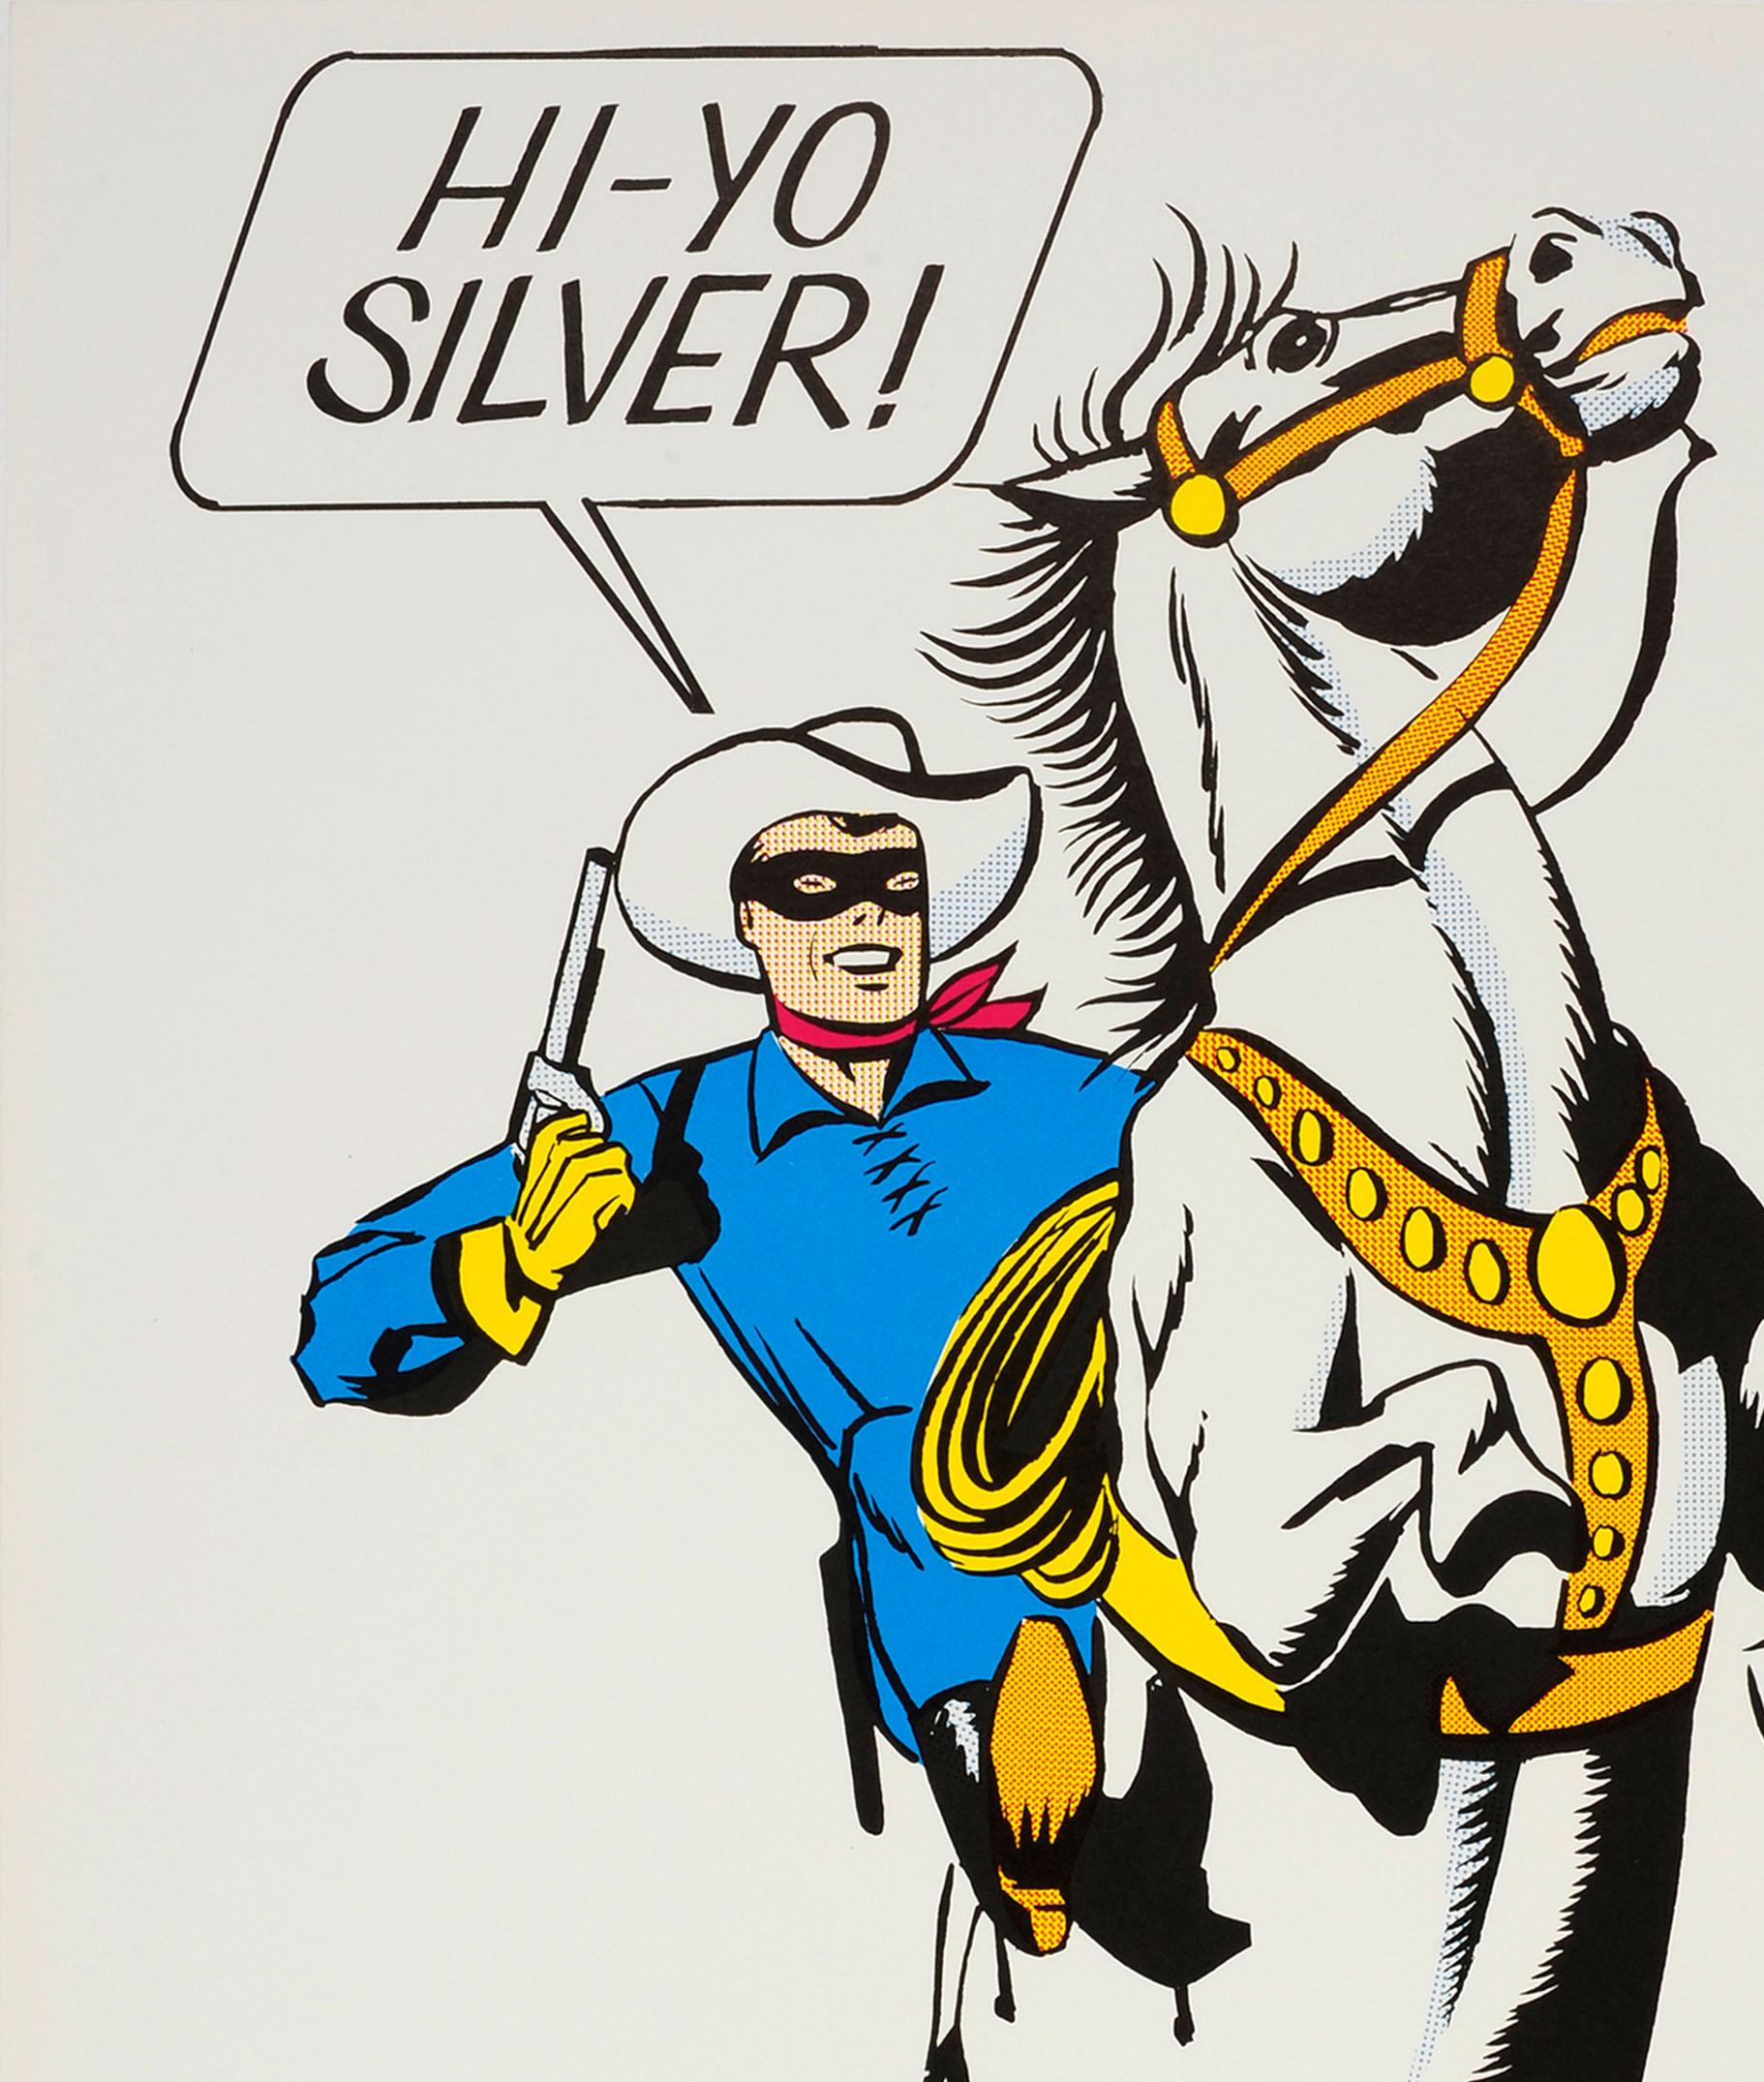 Original vintage advertising poster promoting The Lone Ranger animated cartoon series (1966-1969) featuring a fun comic style illustration of the masked Lone Ranger character on his silver white horse rearing up, wearing a cowboy hat and red neck